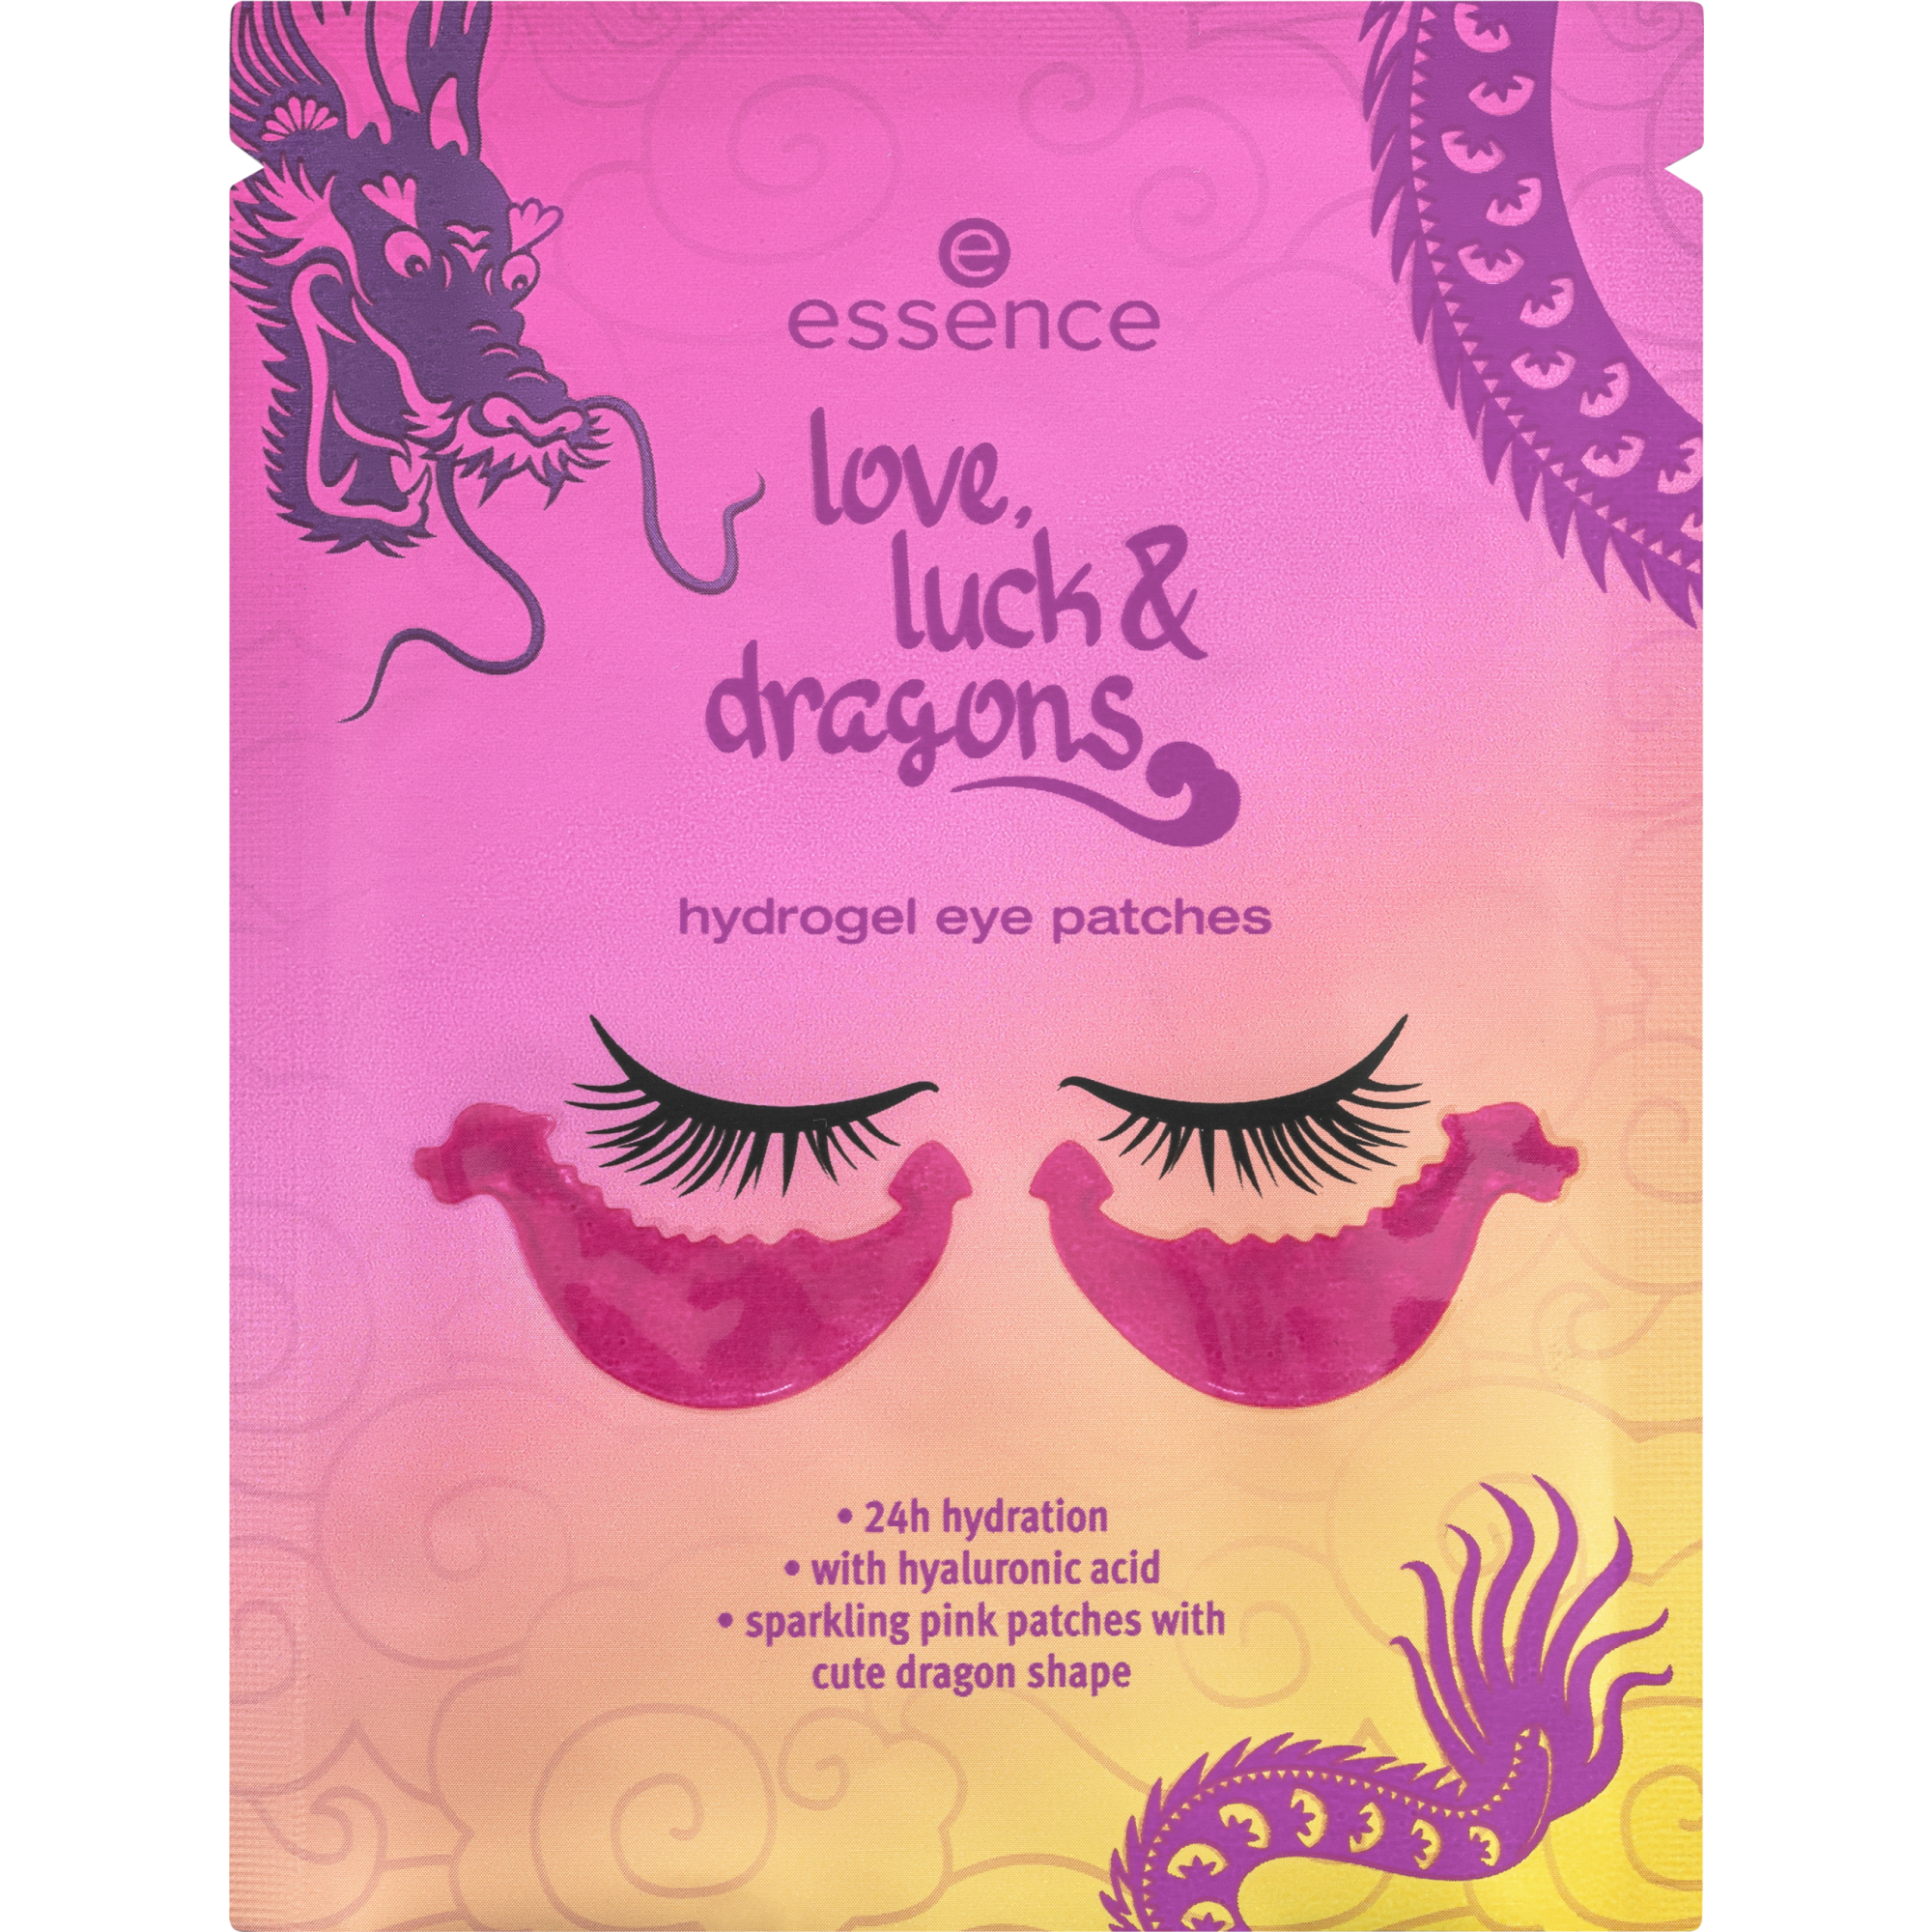 love, luck & dragons hydrogel eye patches patchs yeux